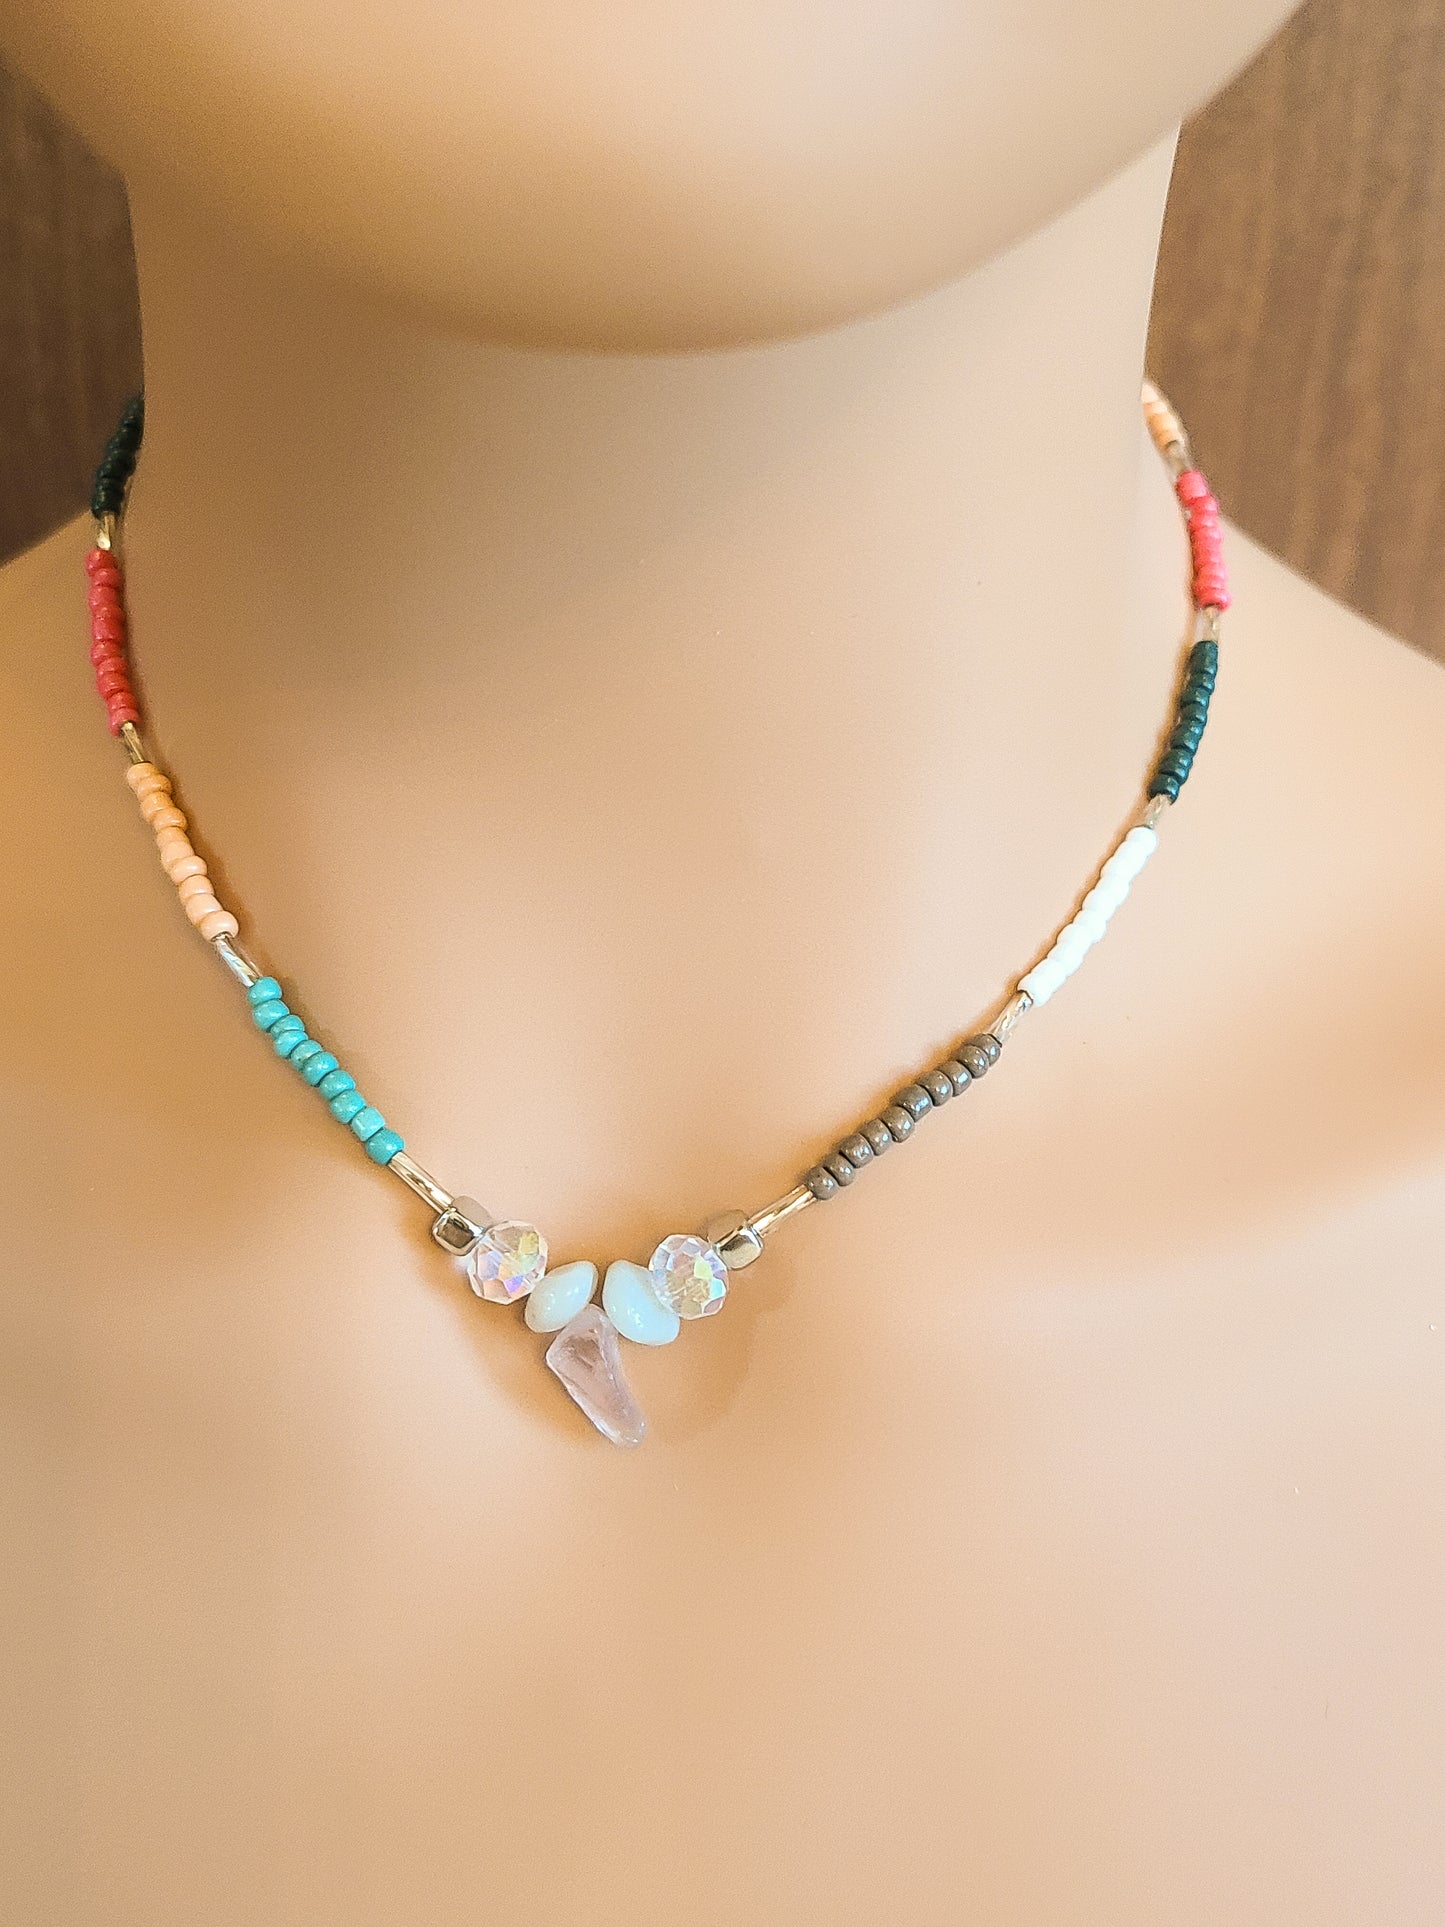 Geometric Natural Stone Seed Bead Necklace